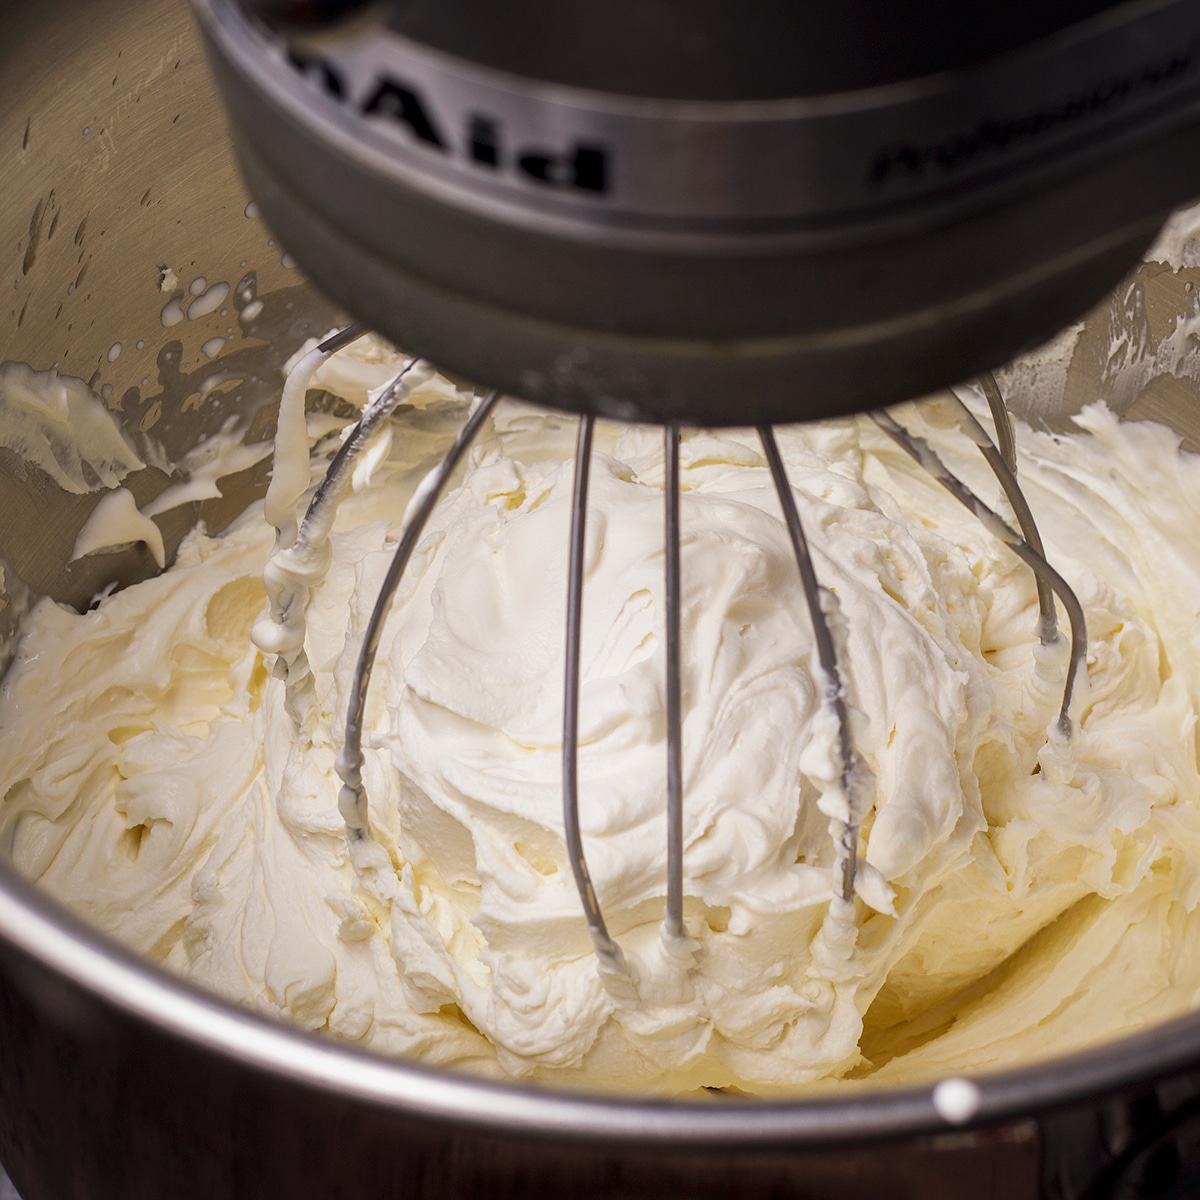 Using an electric mixer to beat mascarpone frosting.